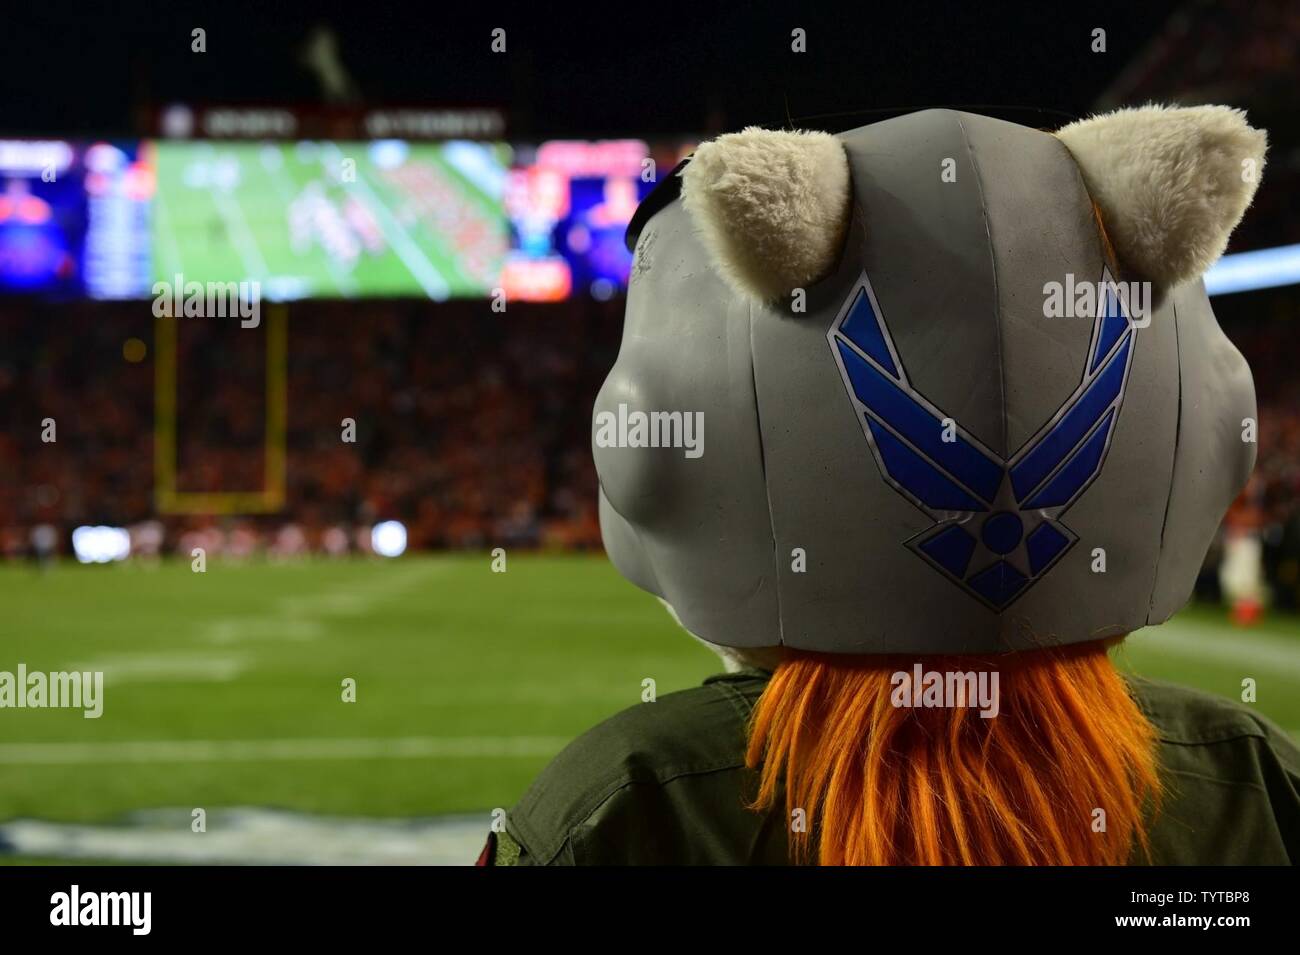 Miles, the Denver Broncos mascot, watches the Broncos play the Kansas City Chiefs Nov. 27, 2016, during a Denver Broncos Salute to Service game Nov. 27, 2016, at Sports Authority Field at Mile High in Denver. The Denver Broncos participate in the Salute to Service campaign to honor veterans and active duty military members. Stock Photo